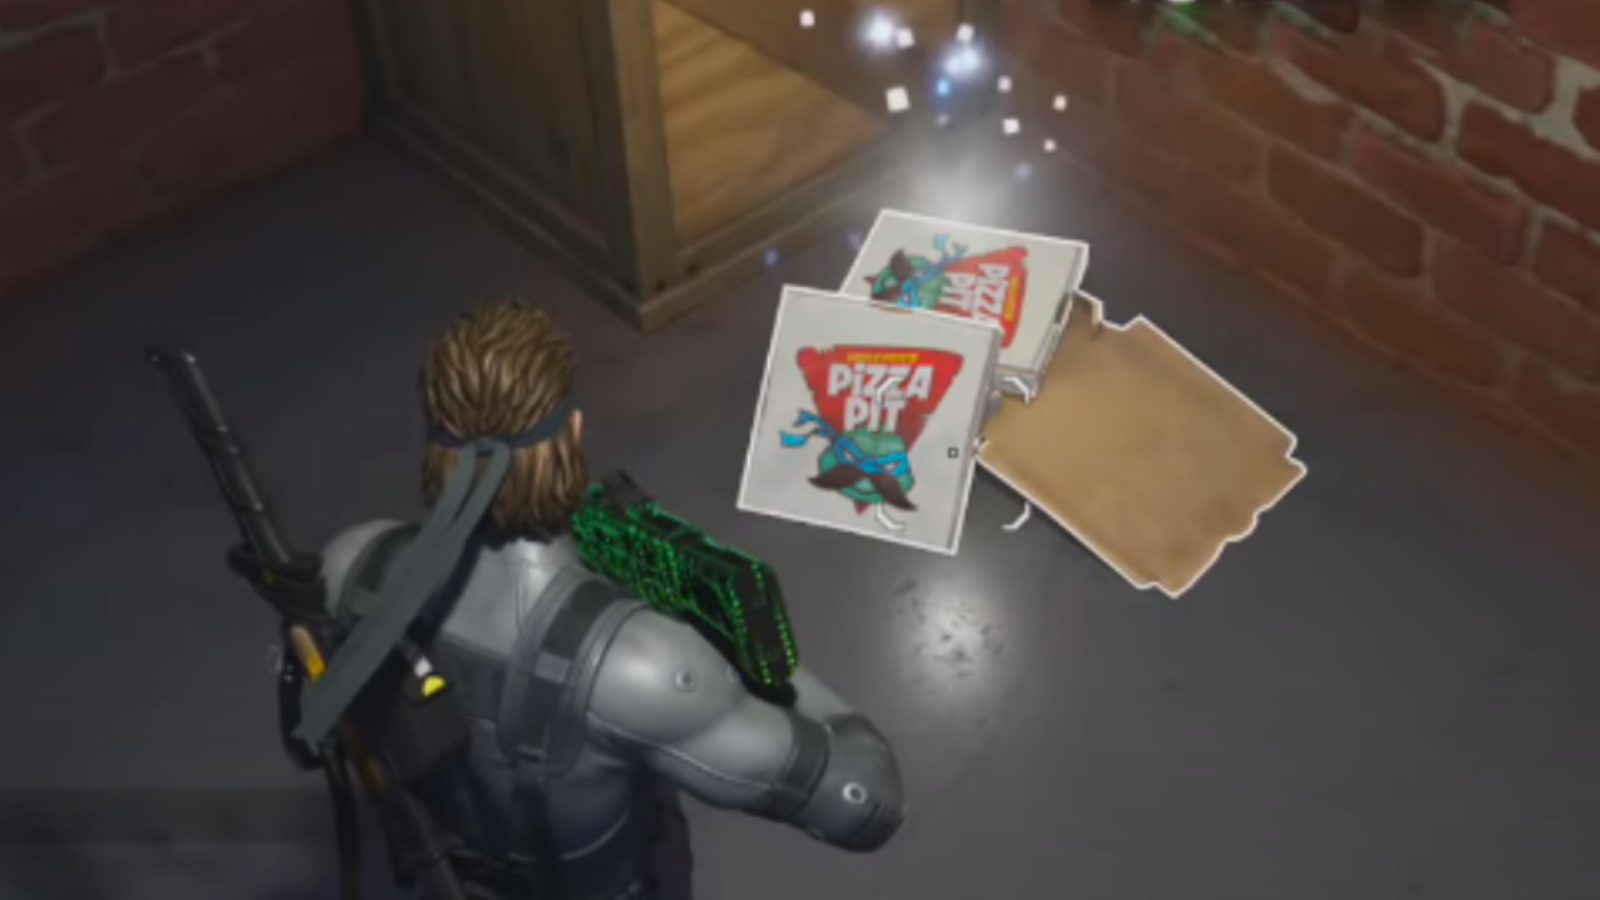 New in-game challenge: Finding empty pizza boxes in Fortnite